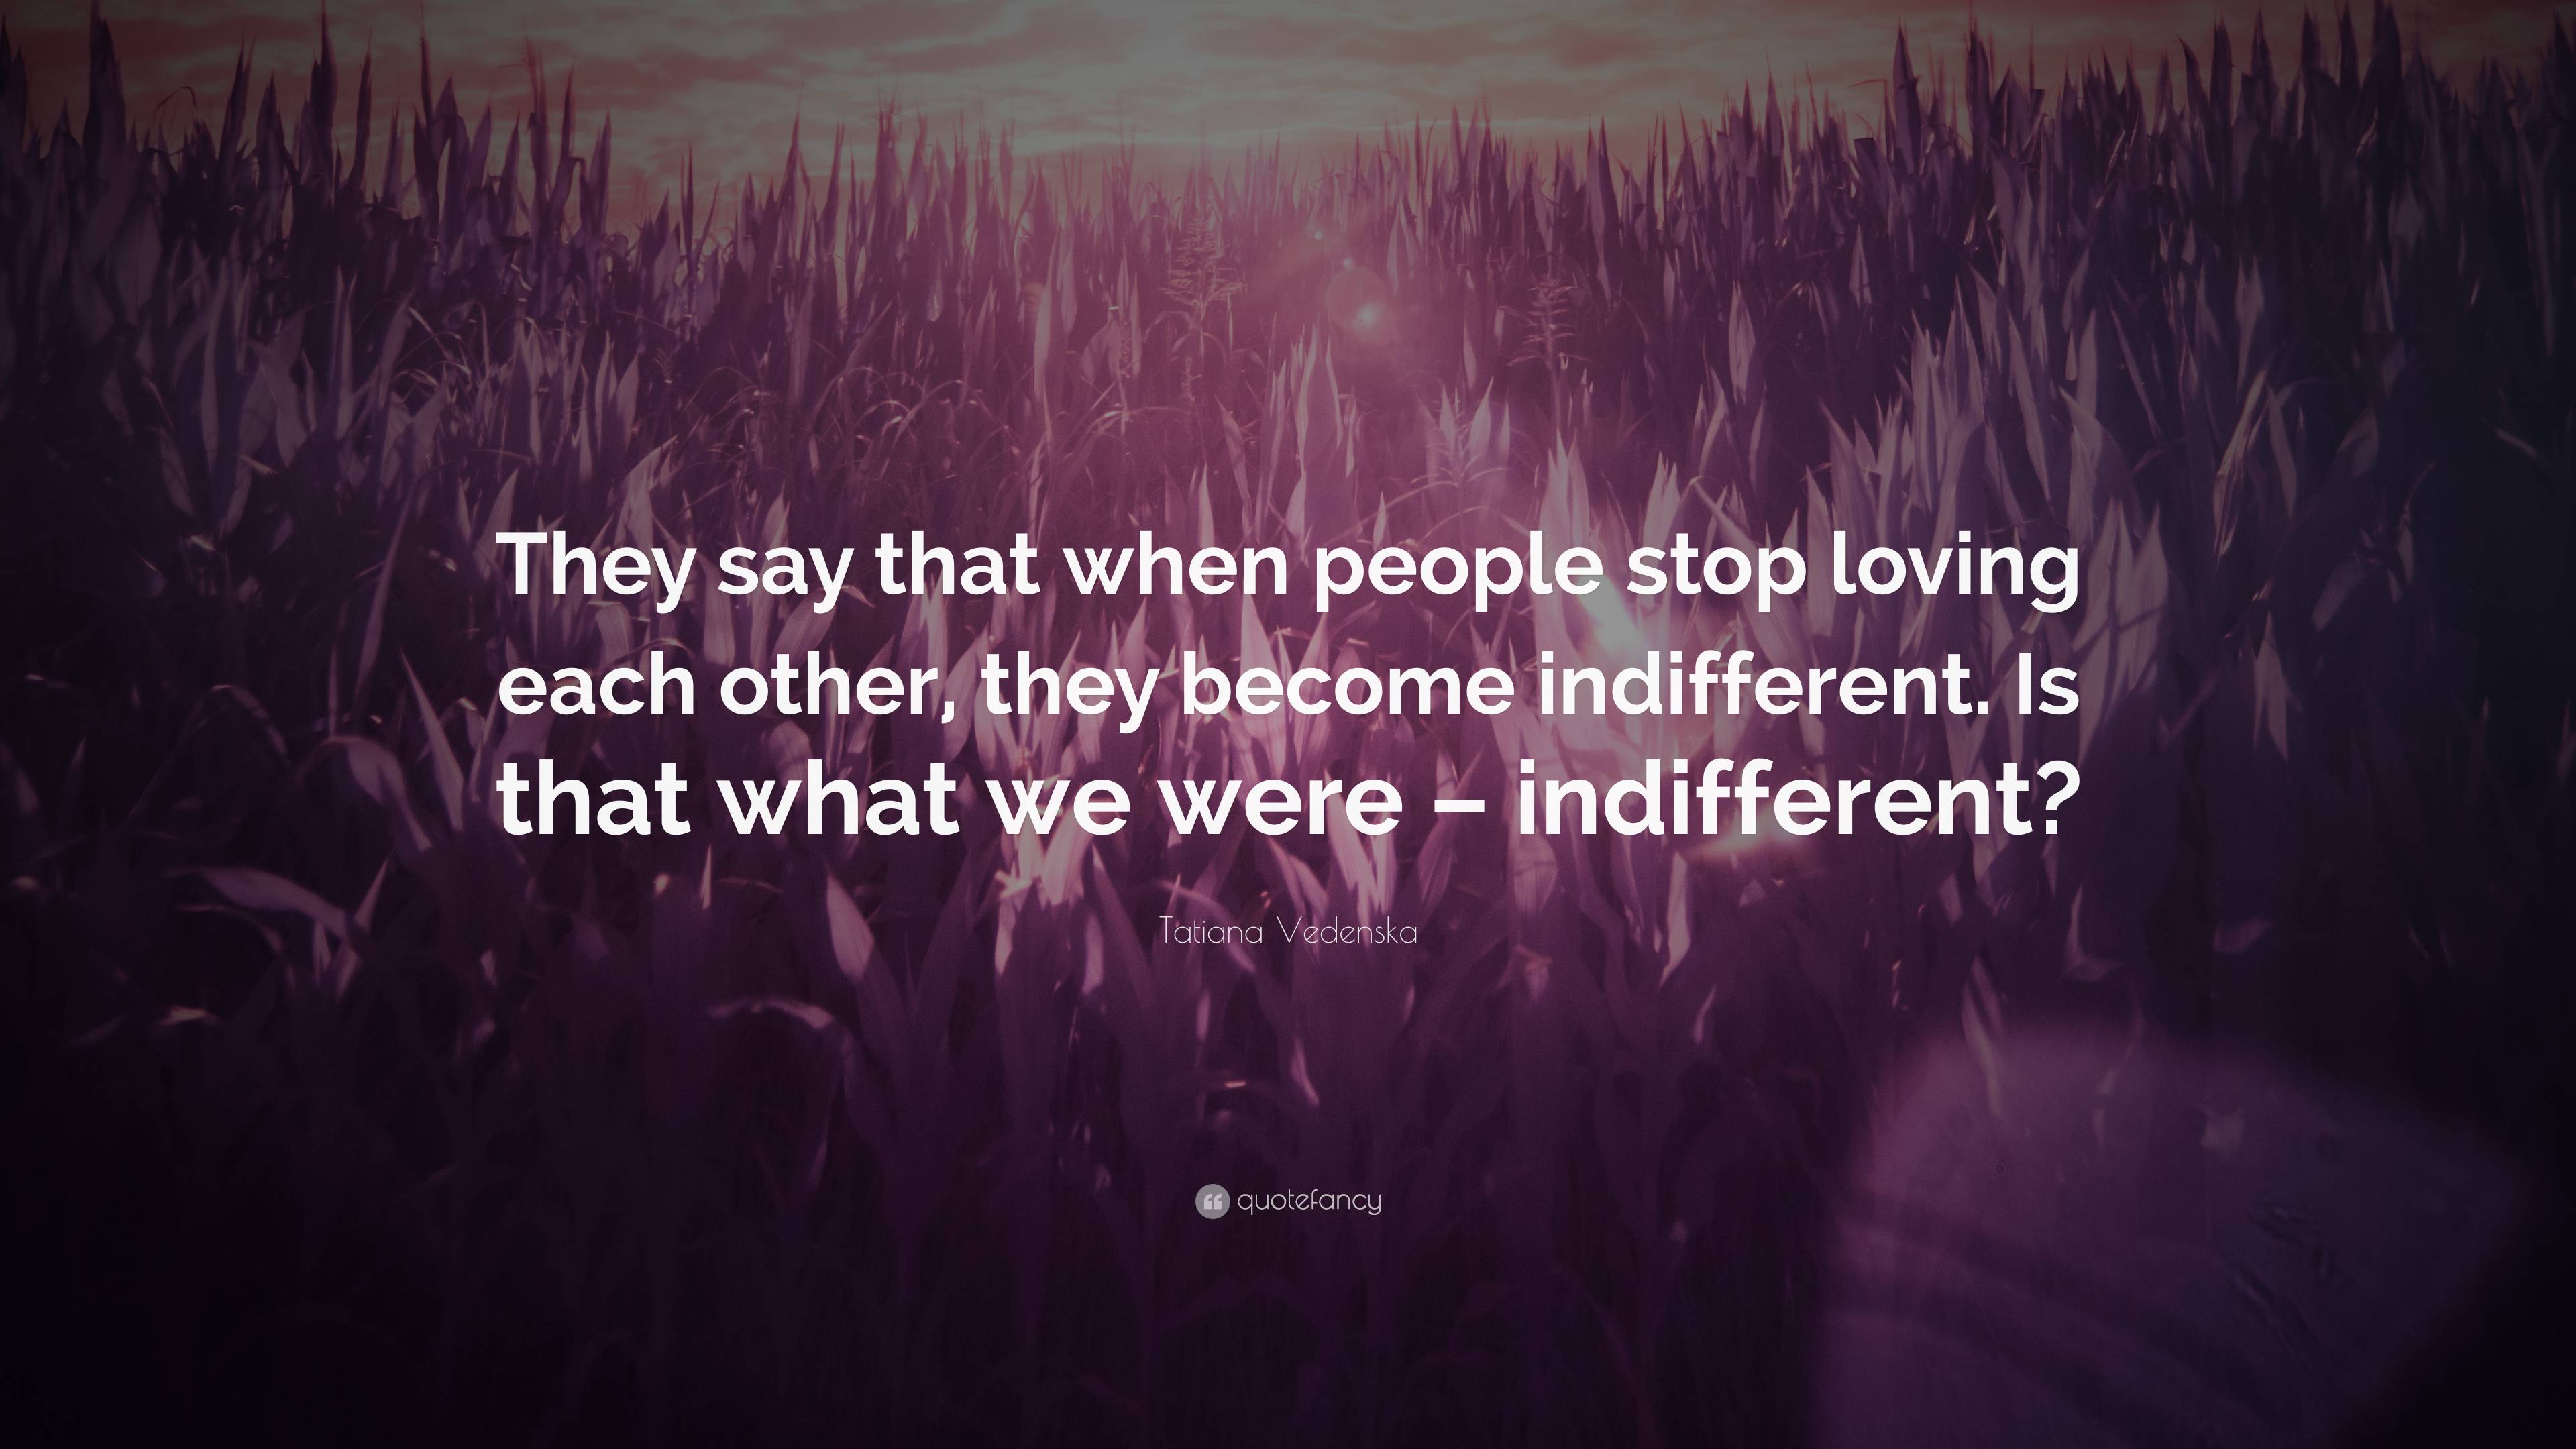 Tatiana Vedenska Quote: “They say that when people stop loving each ...